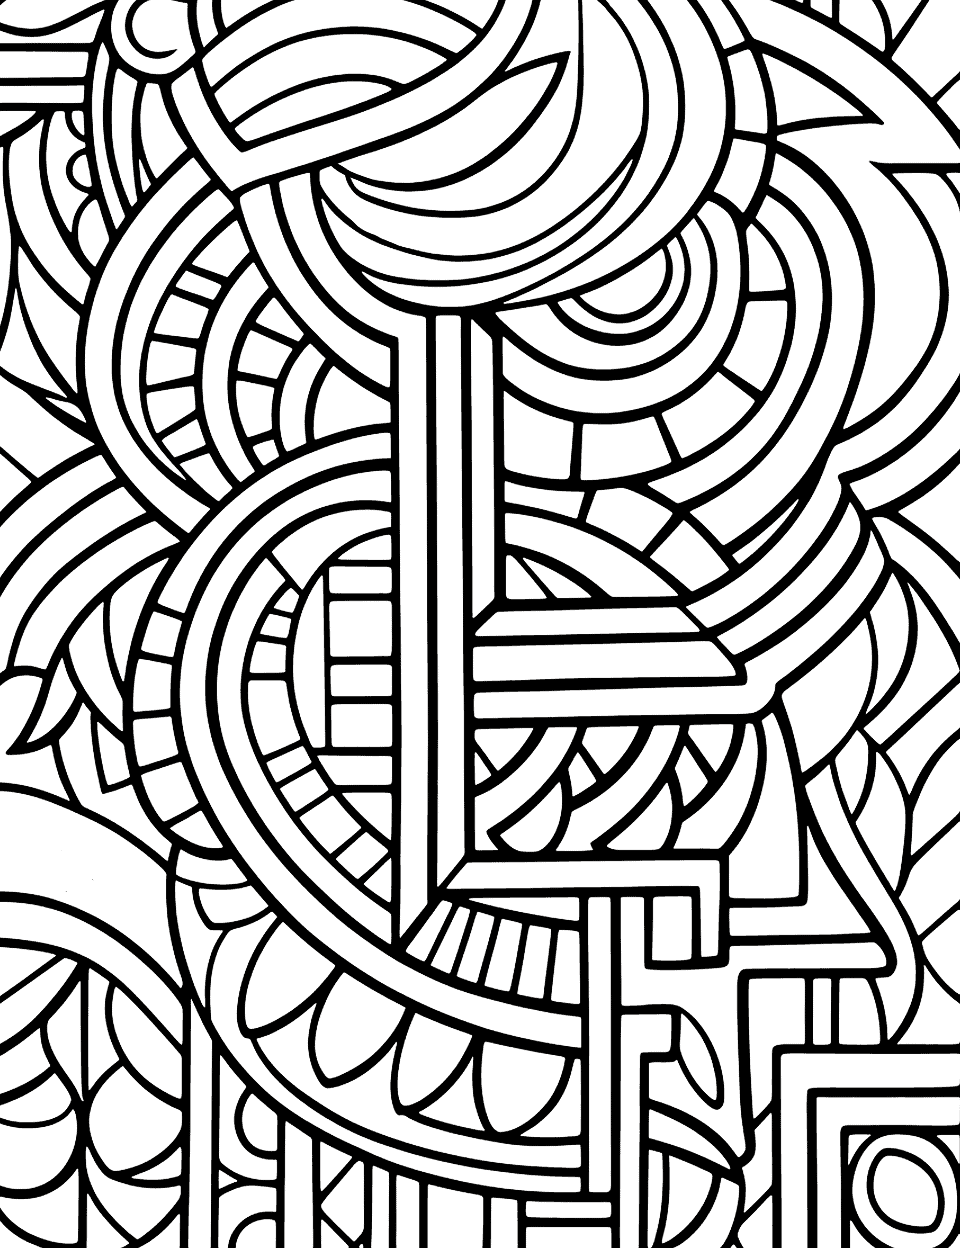 Abstract Geomtetric Design Adult Coloring Page - An adult coloring page filled with abstract patterns featuring geometric shapes and intricate details.